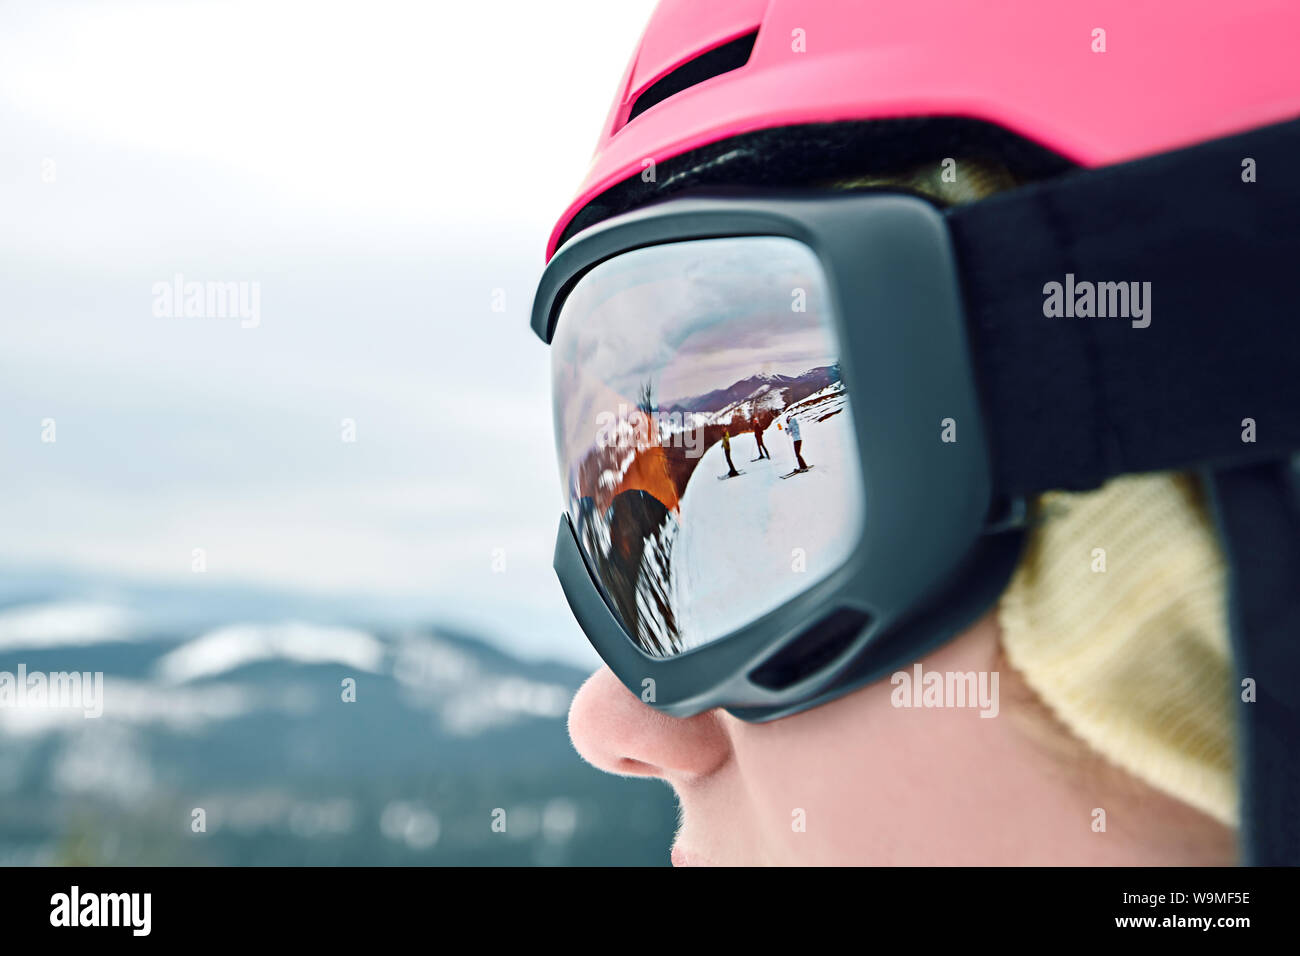 Close up portrait of snowboarder woman at ski resort wearing helmet and goggles with reflection of mountains. Stock Photo